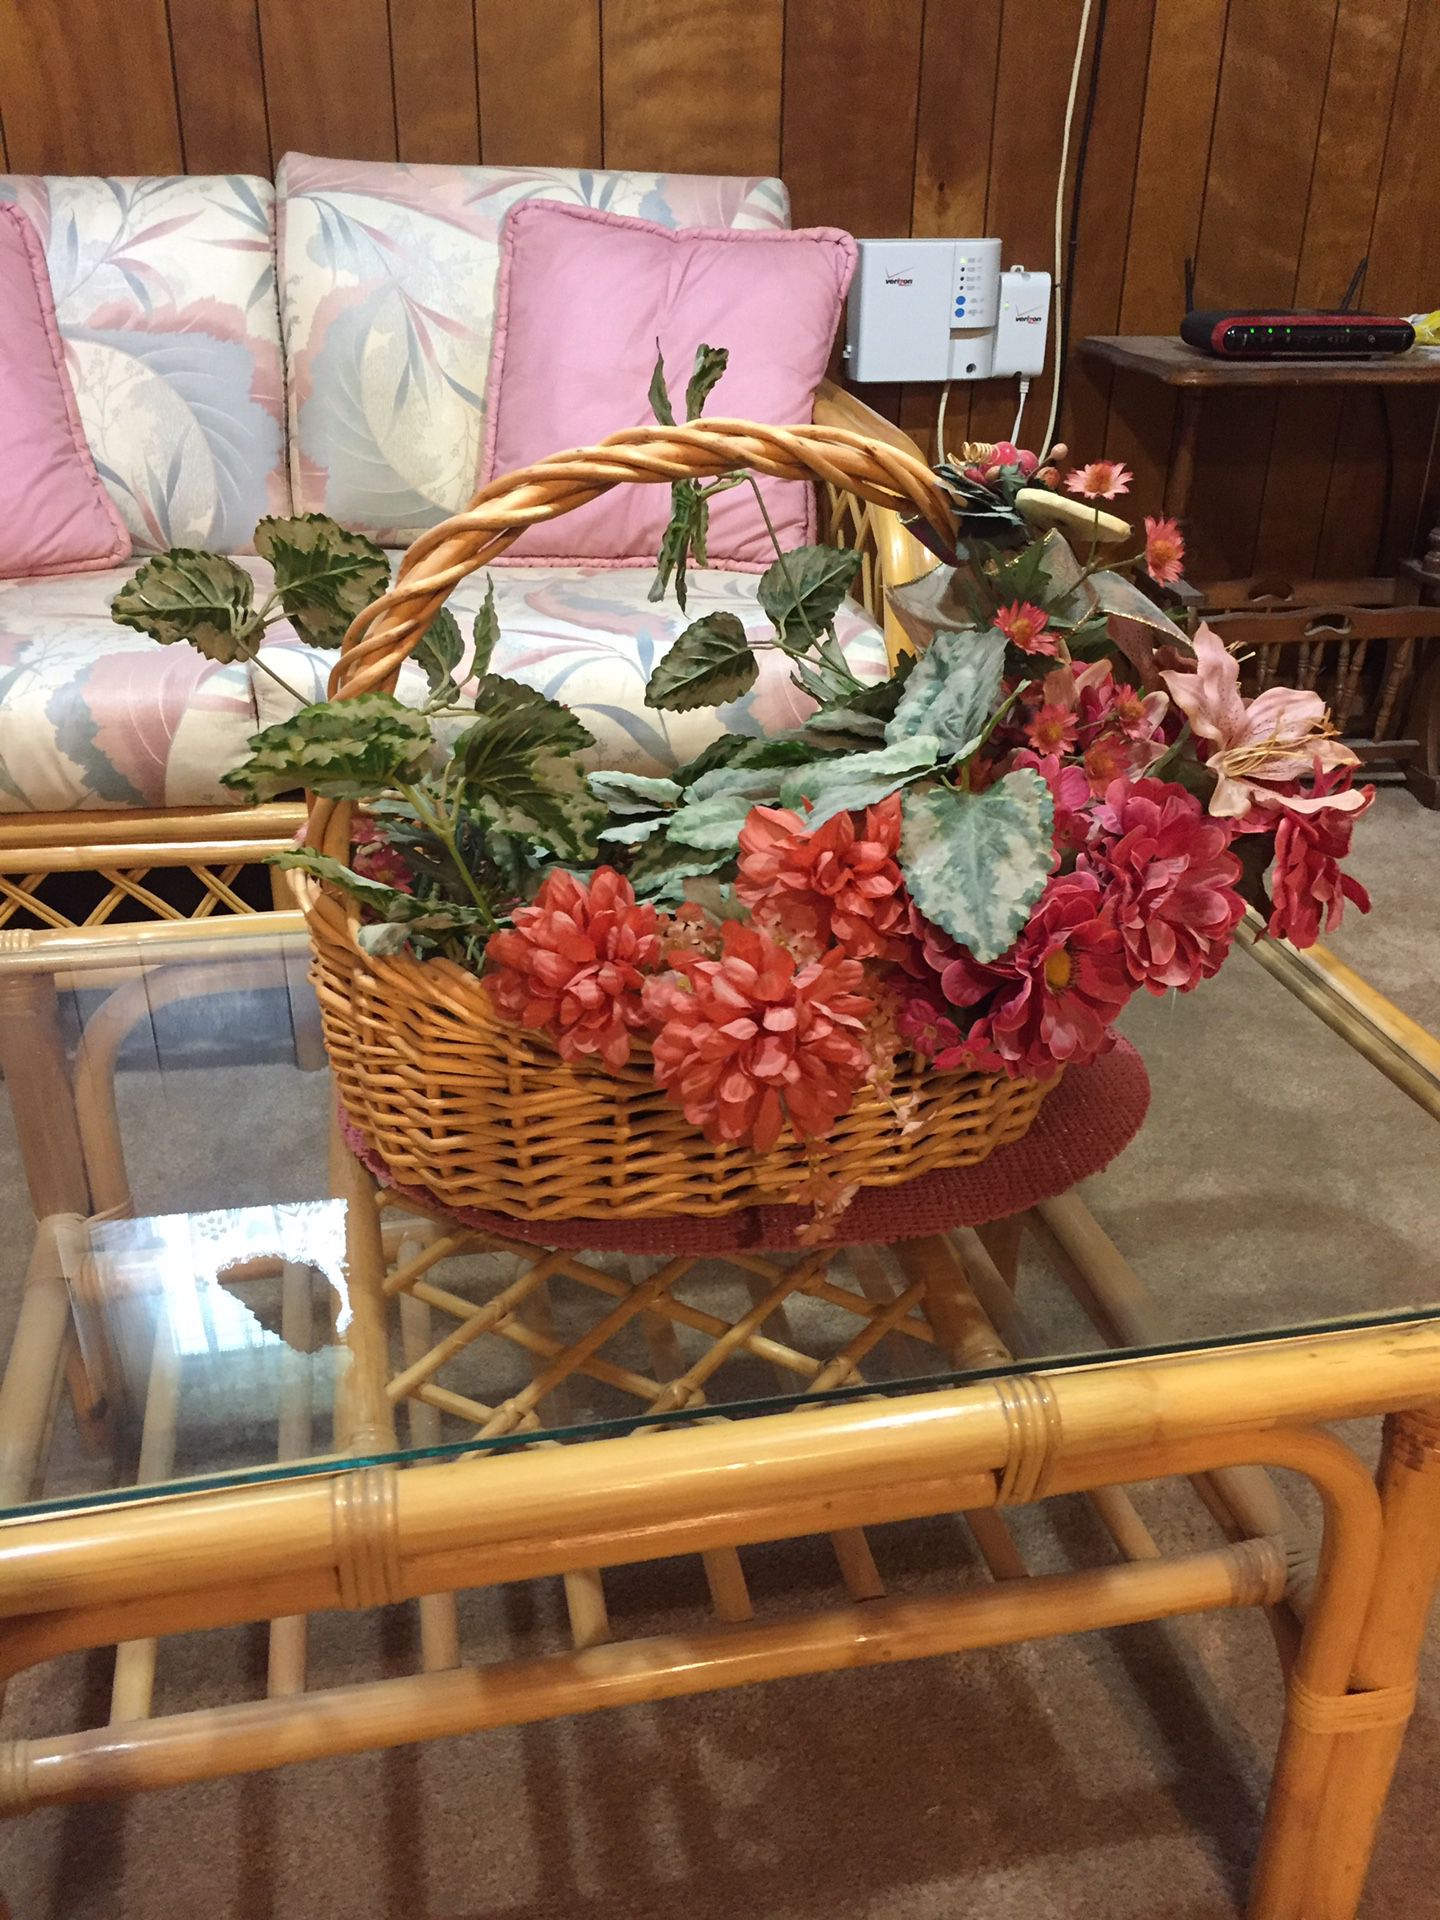 Beautiful basket with hand arranged flowers.